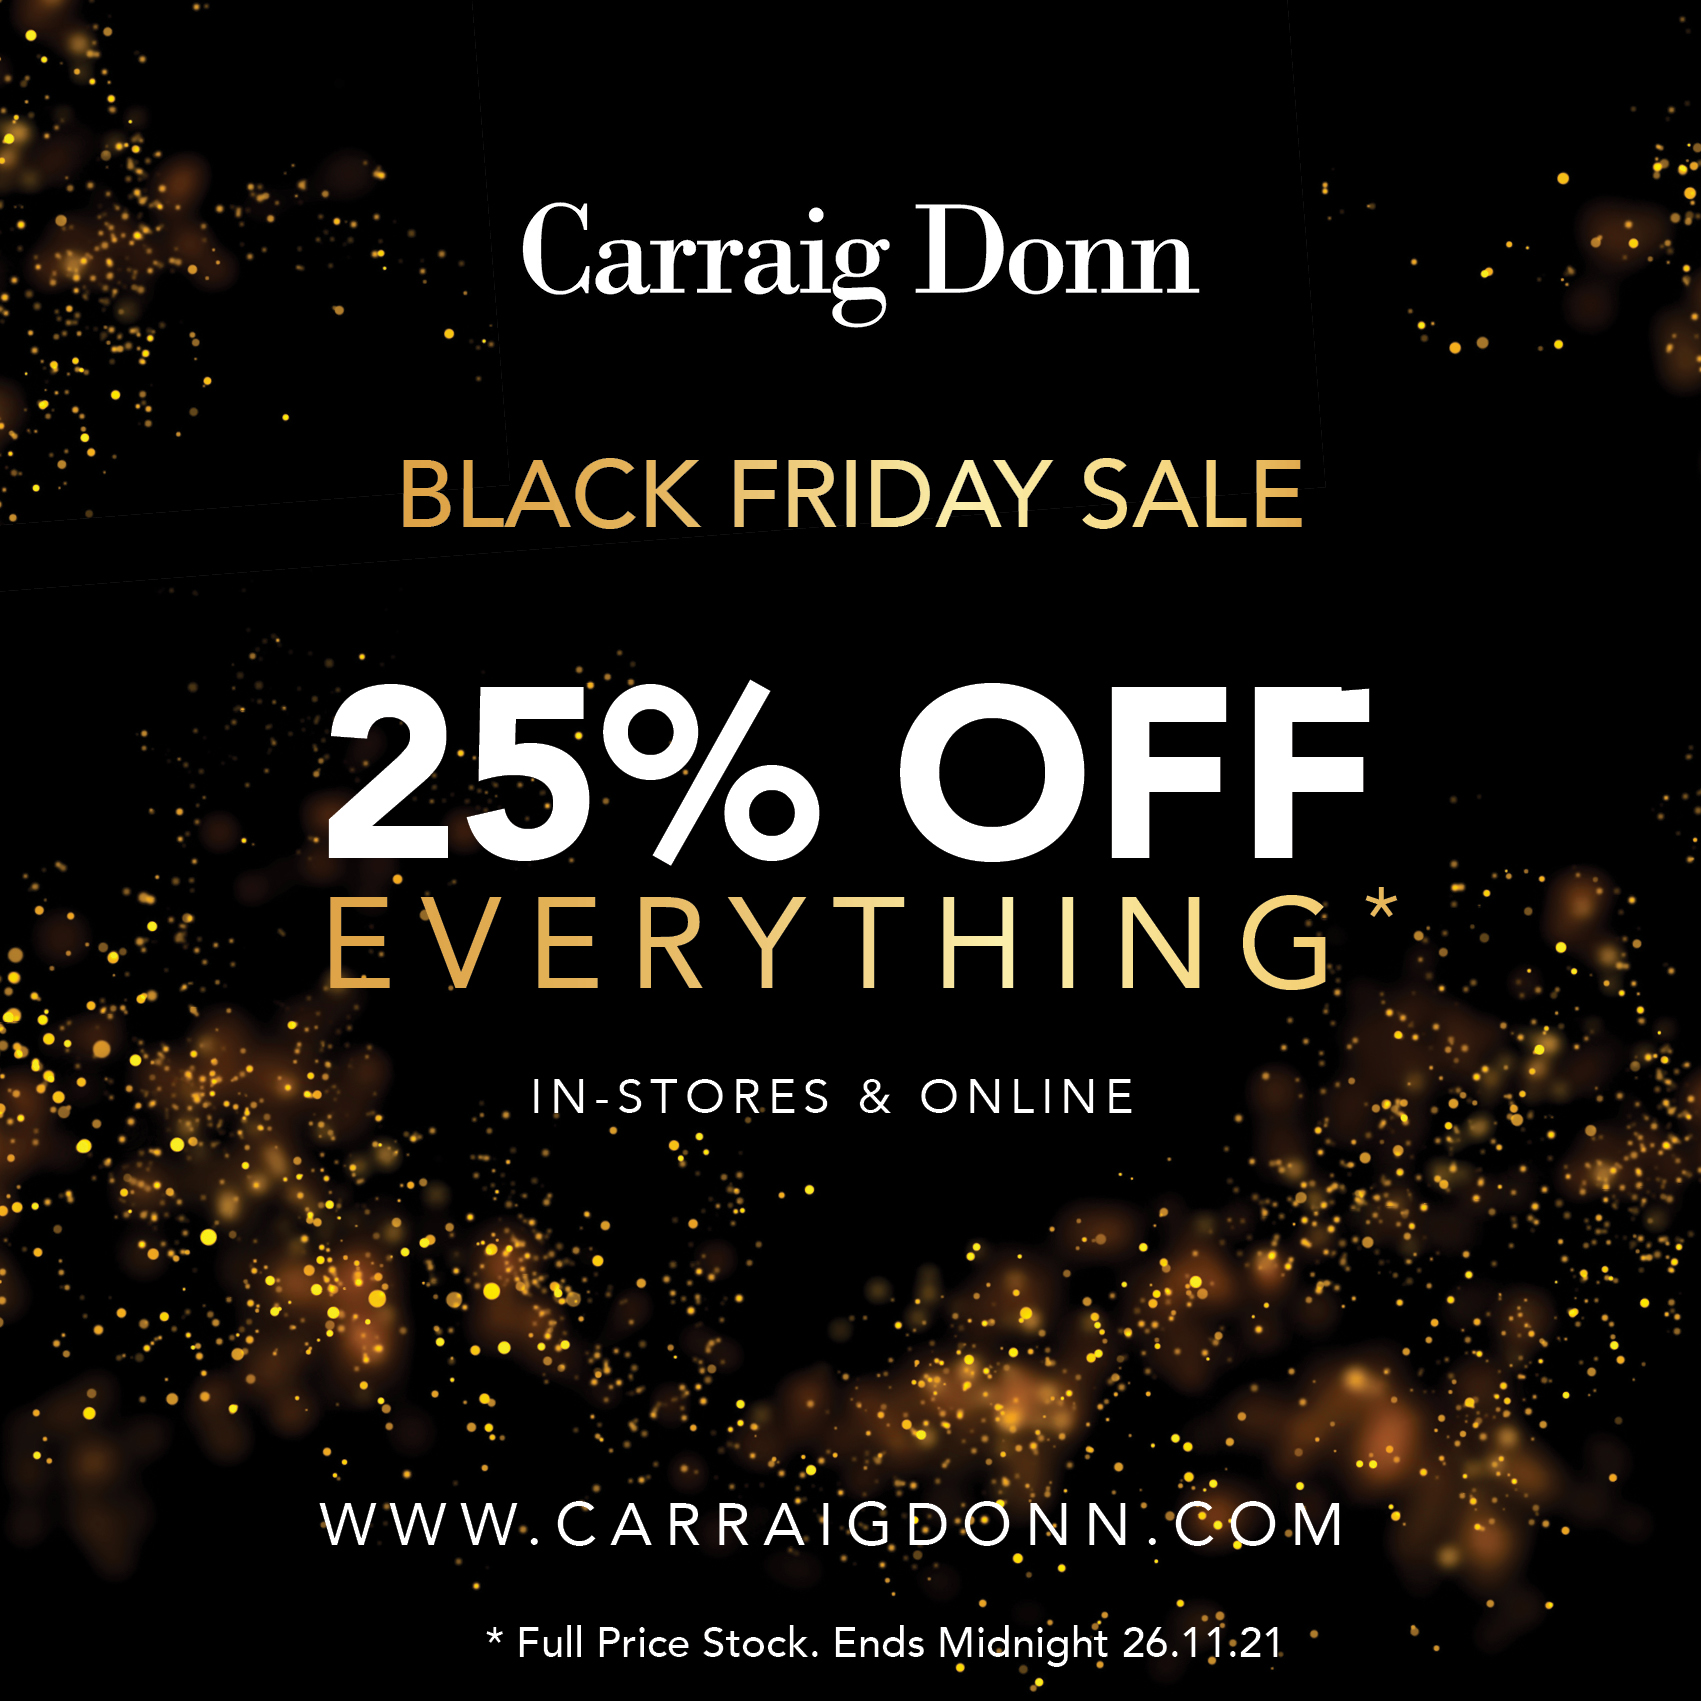 25% OFF EVERYTHING* at Carraig Donn for their Black Friday Sale!